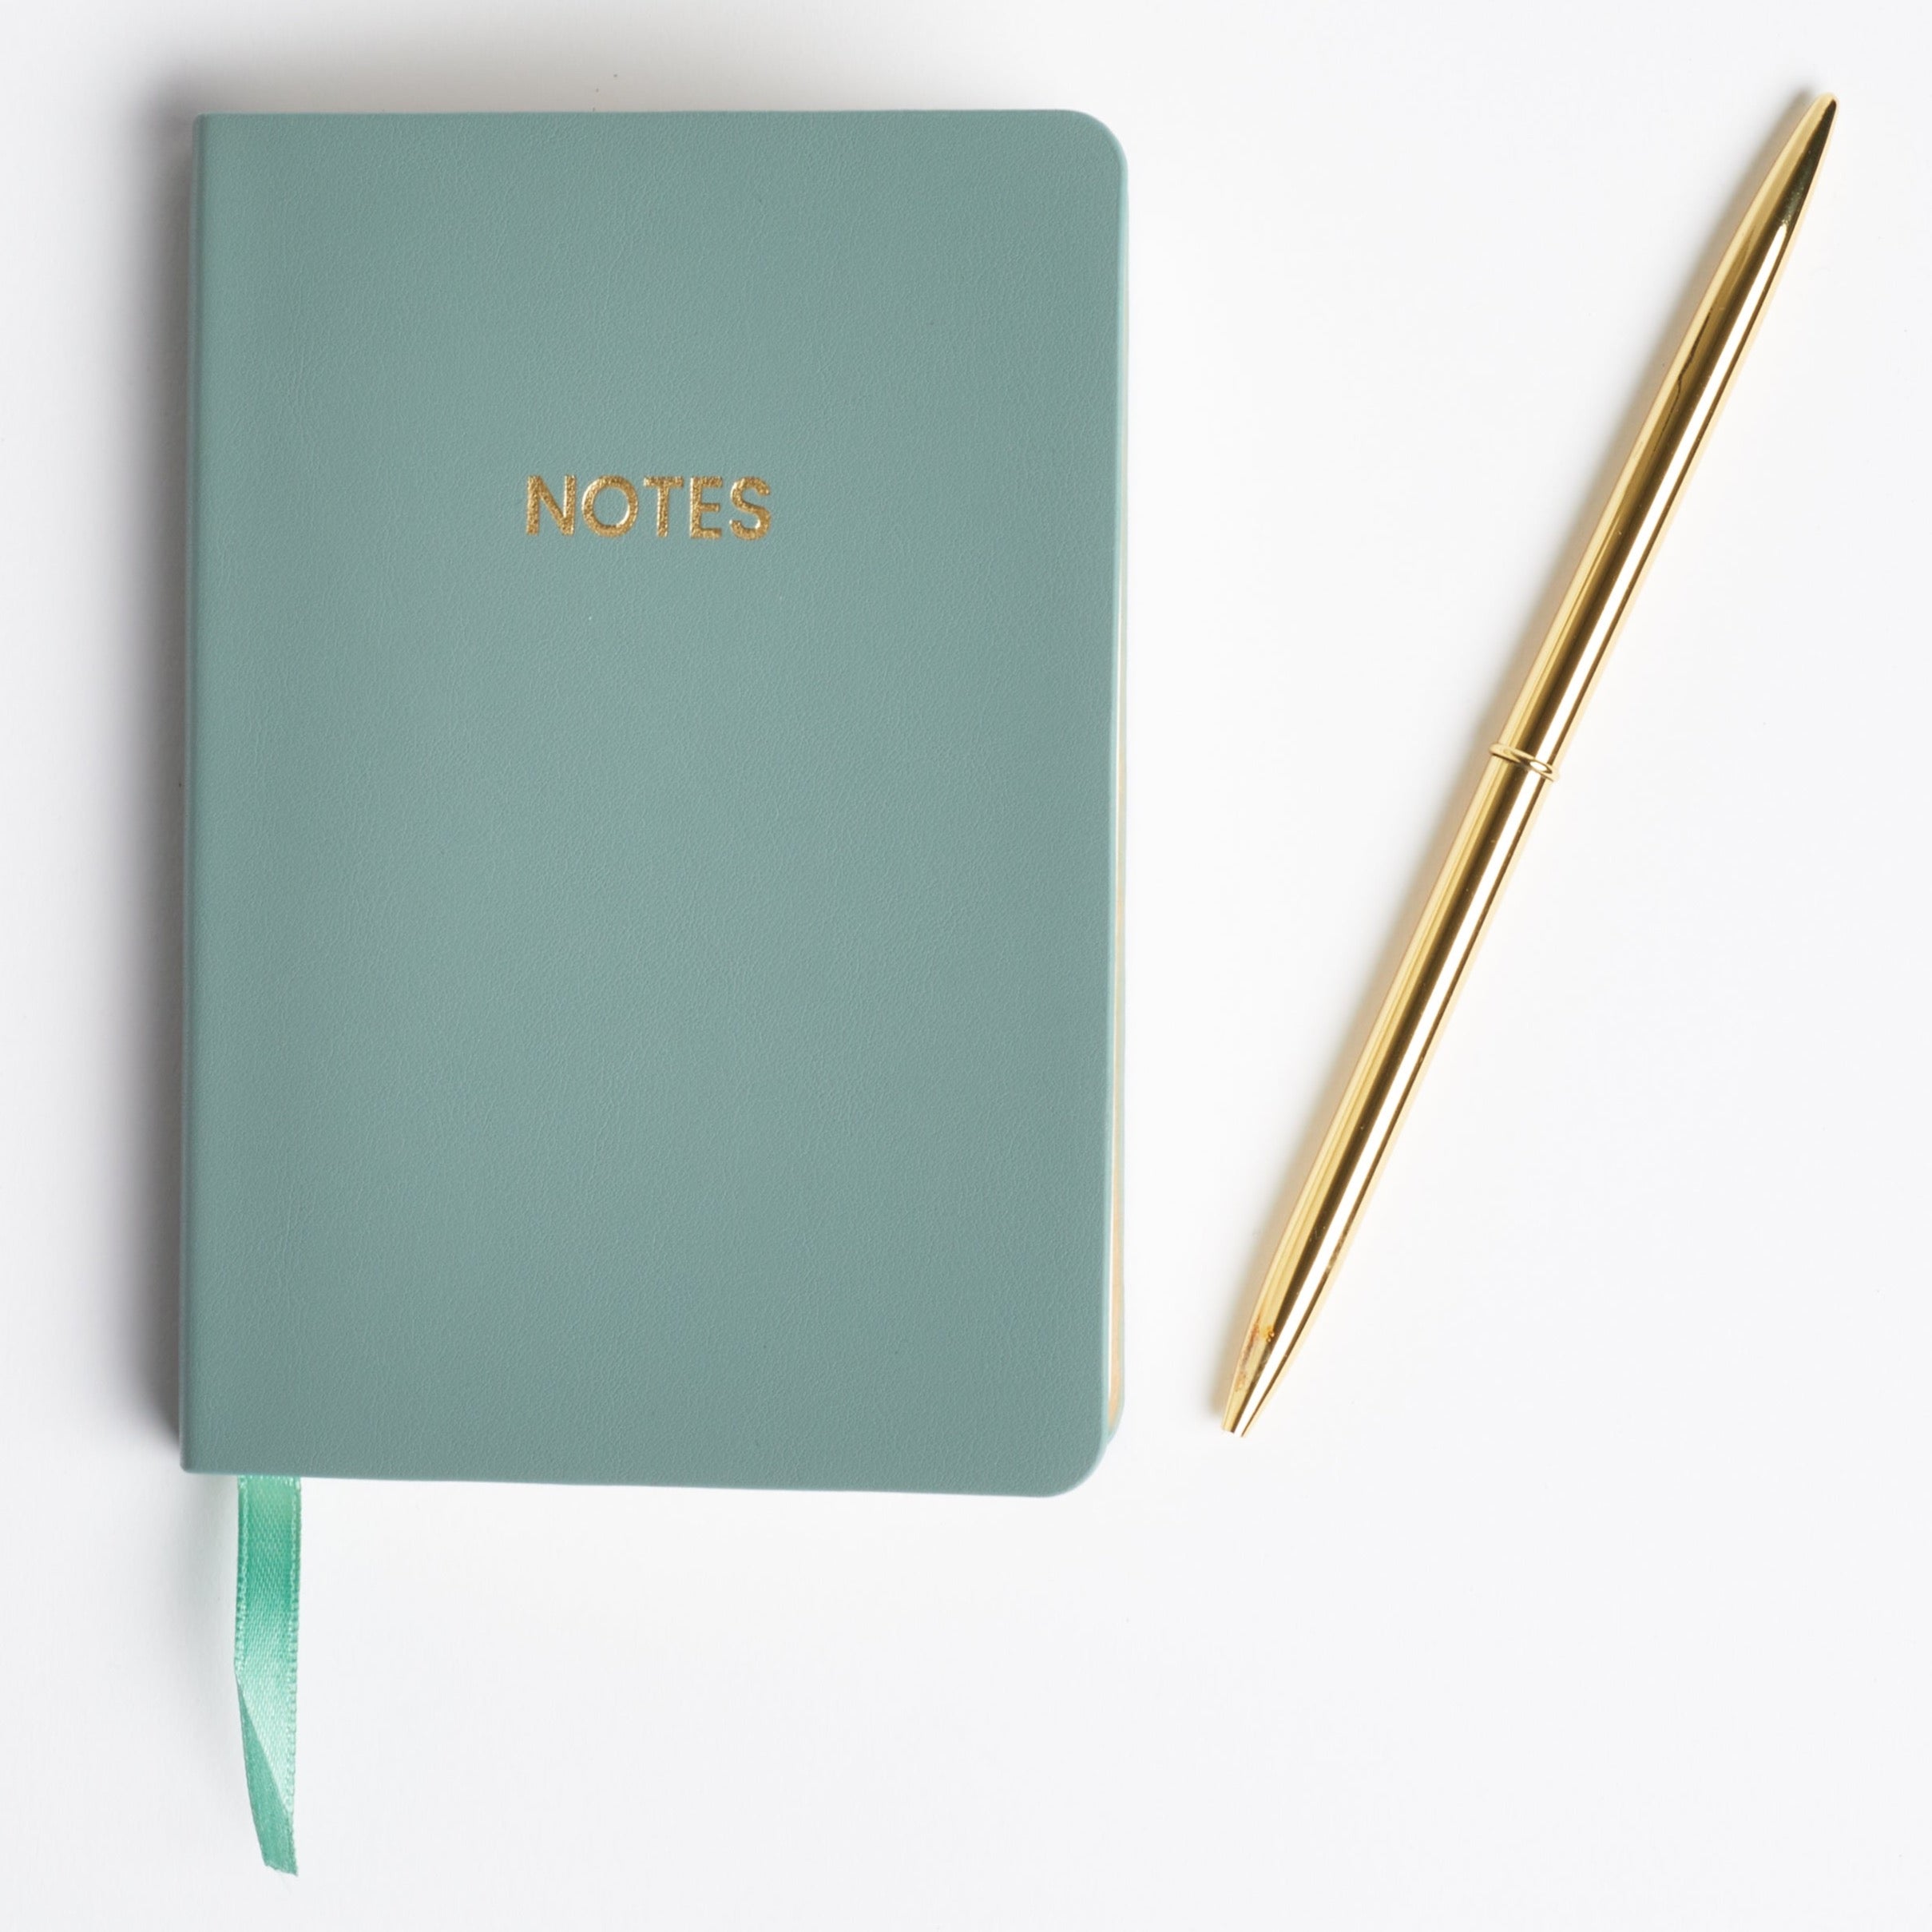 Sage green pocket-sized notebook with a gold "NOTES" written across the top. Next to a gold pen and against a white background